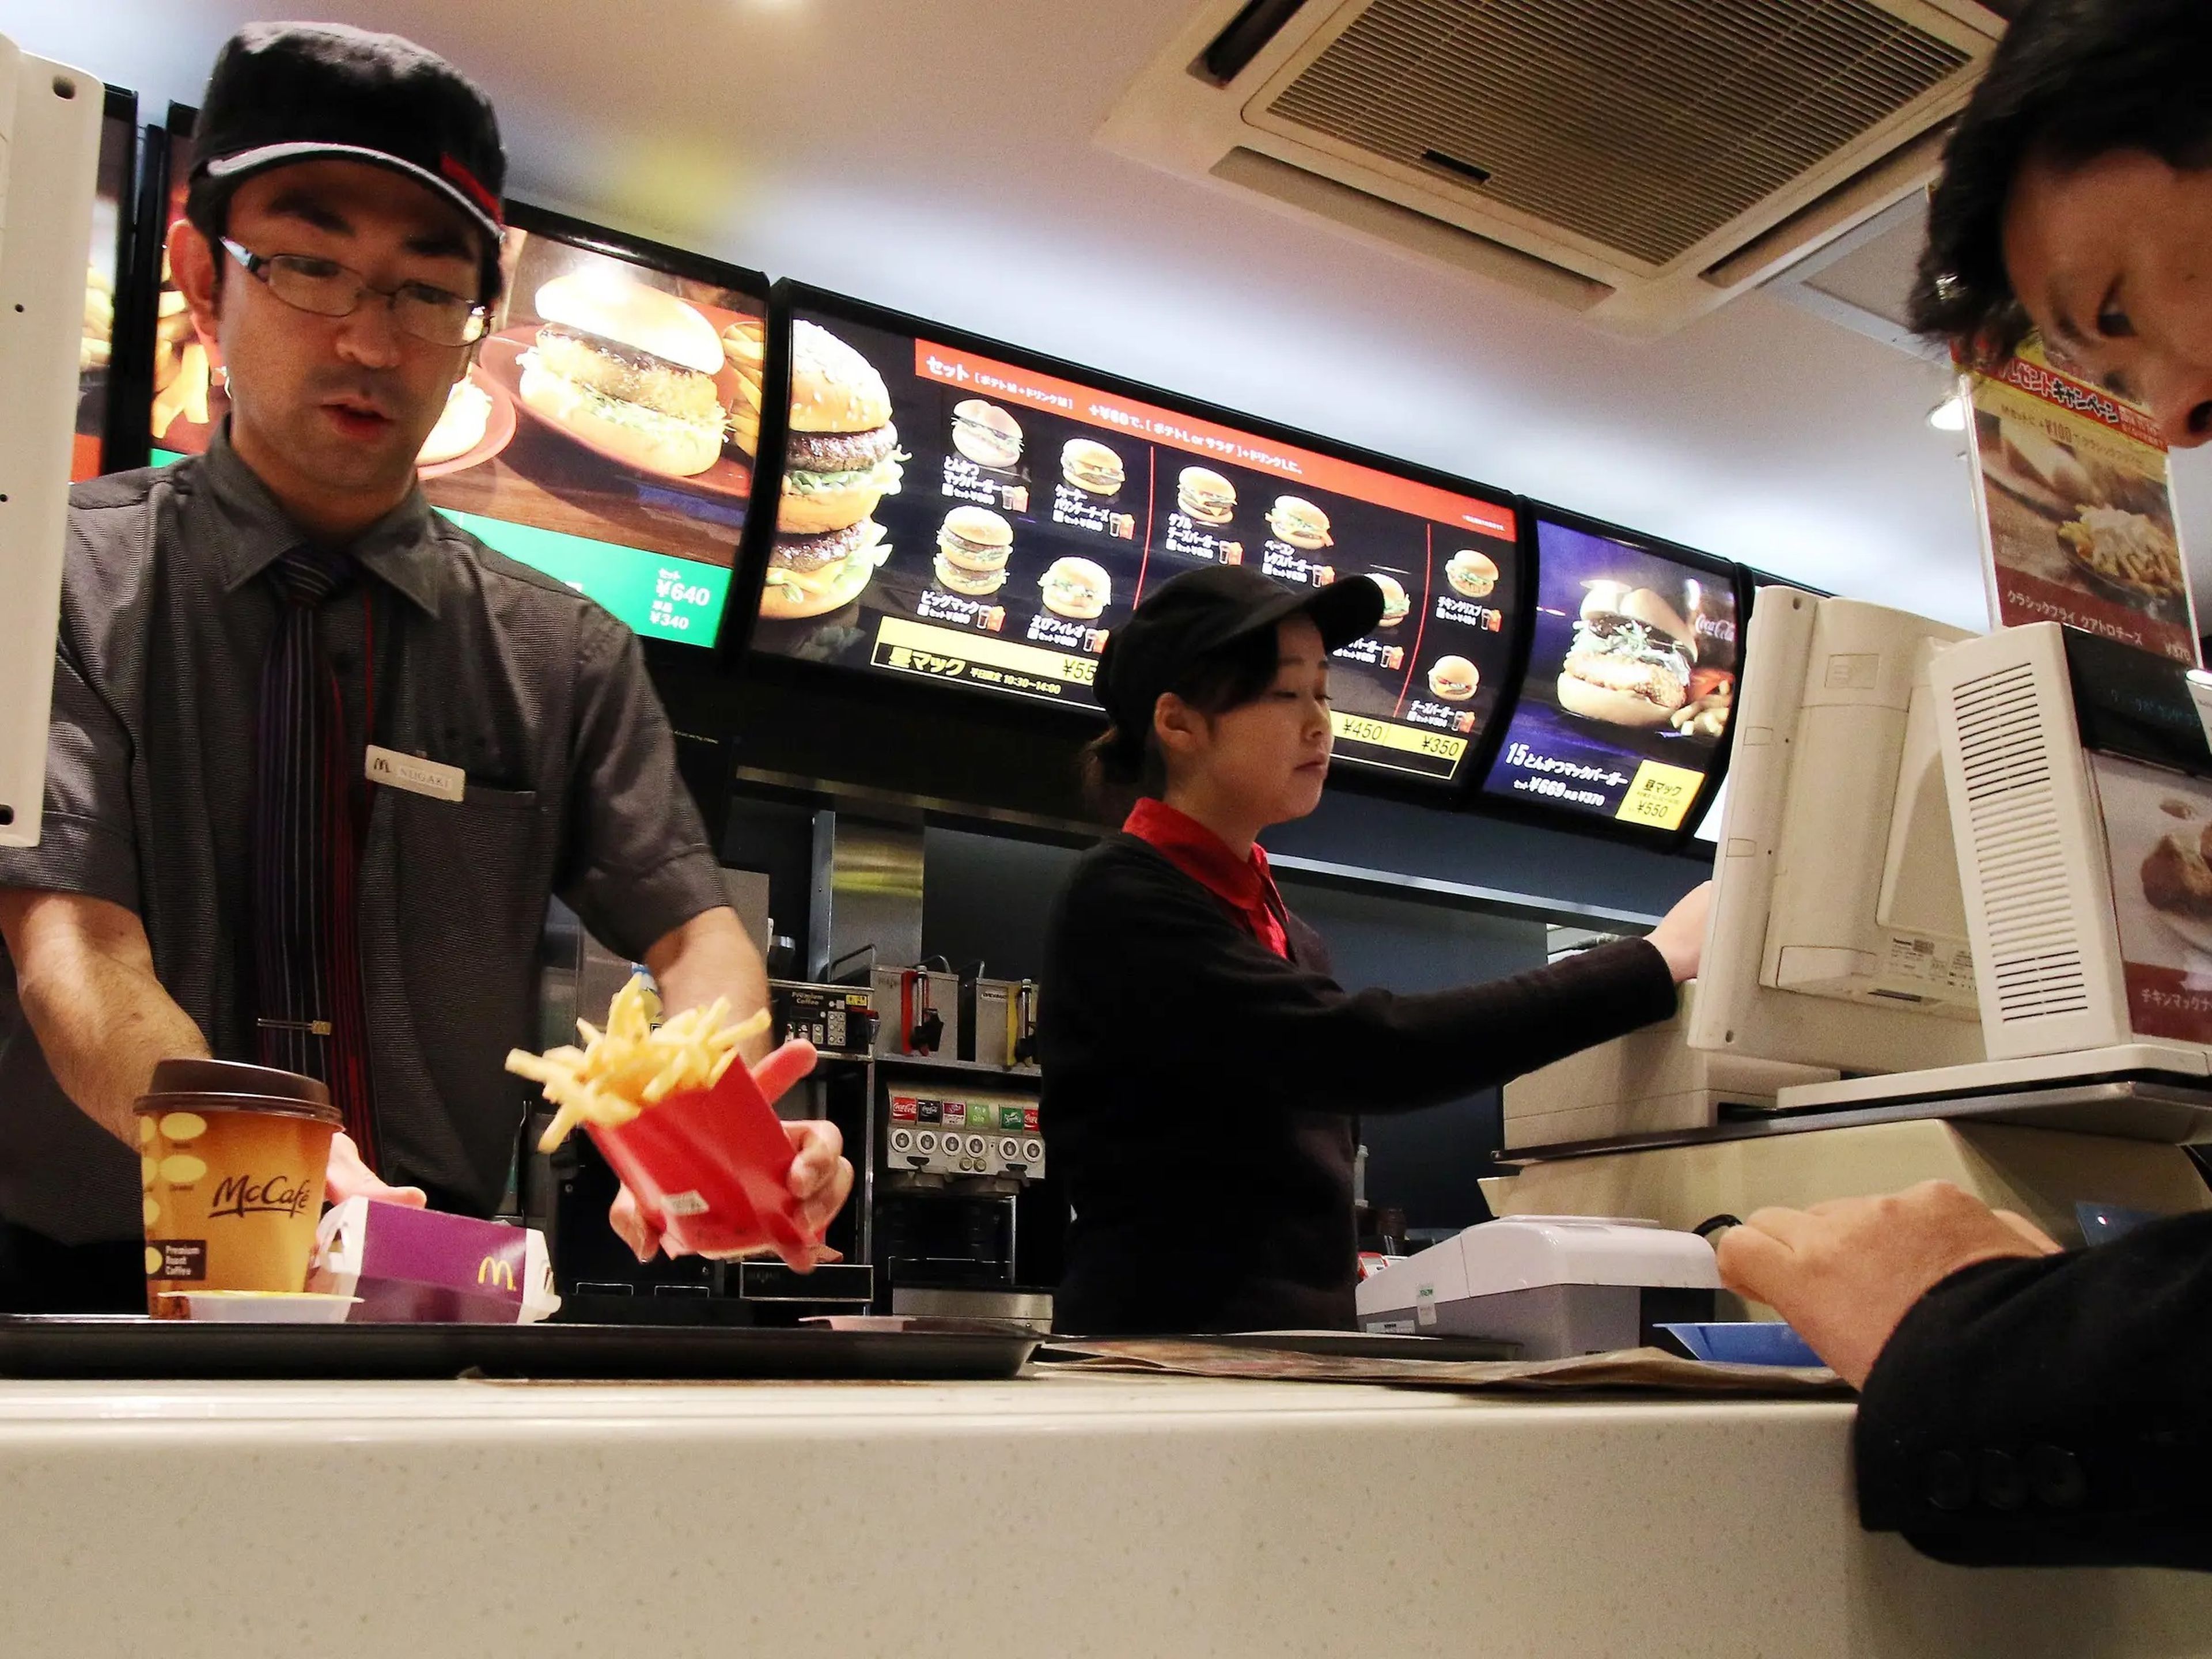 An employee serves french fries to a customer at a McDonald's restaurant in Tokyo.